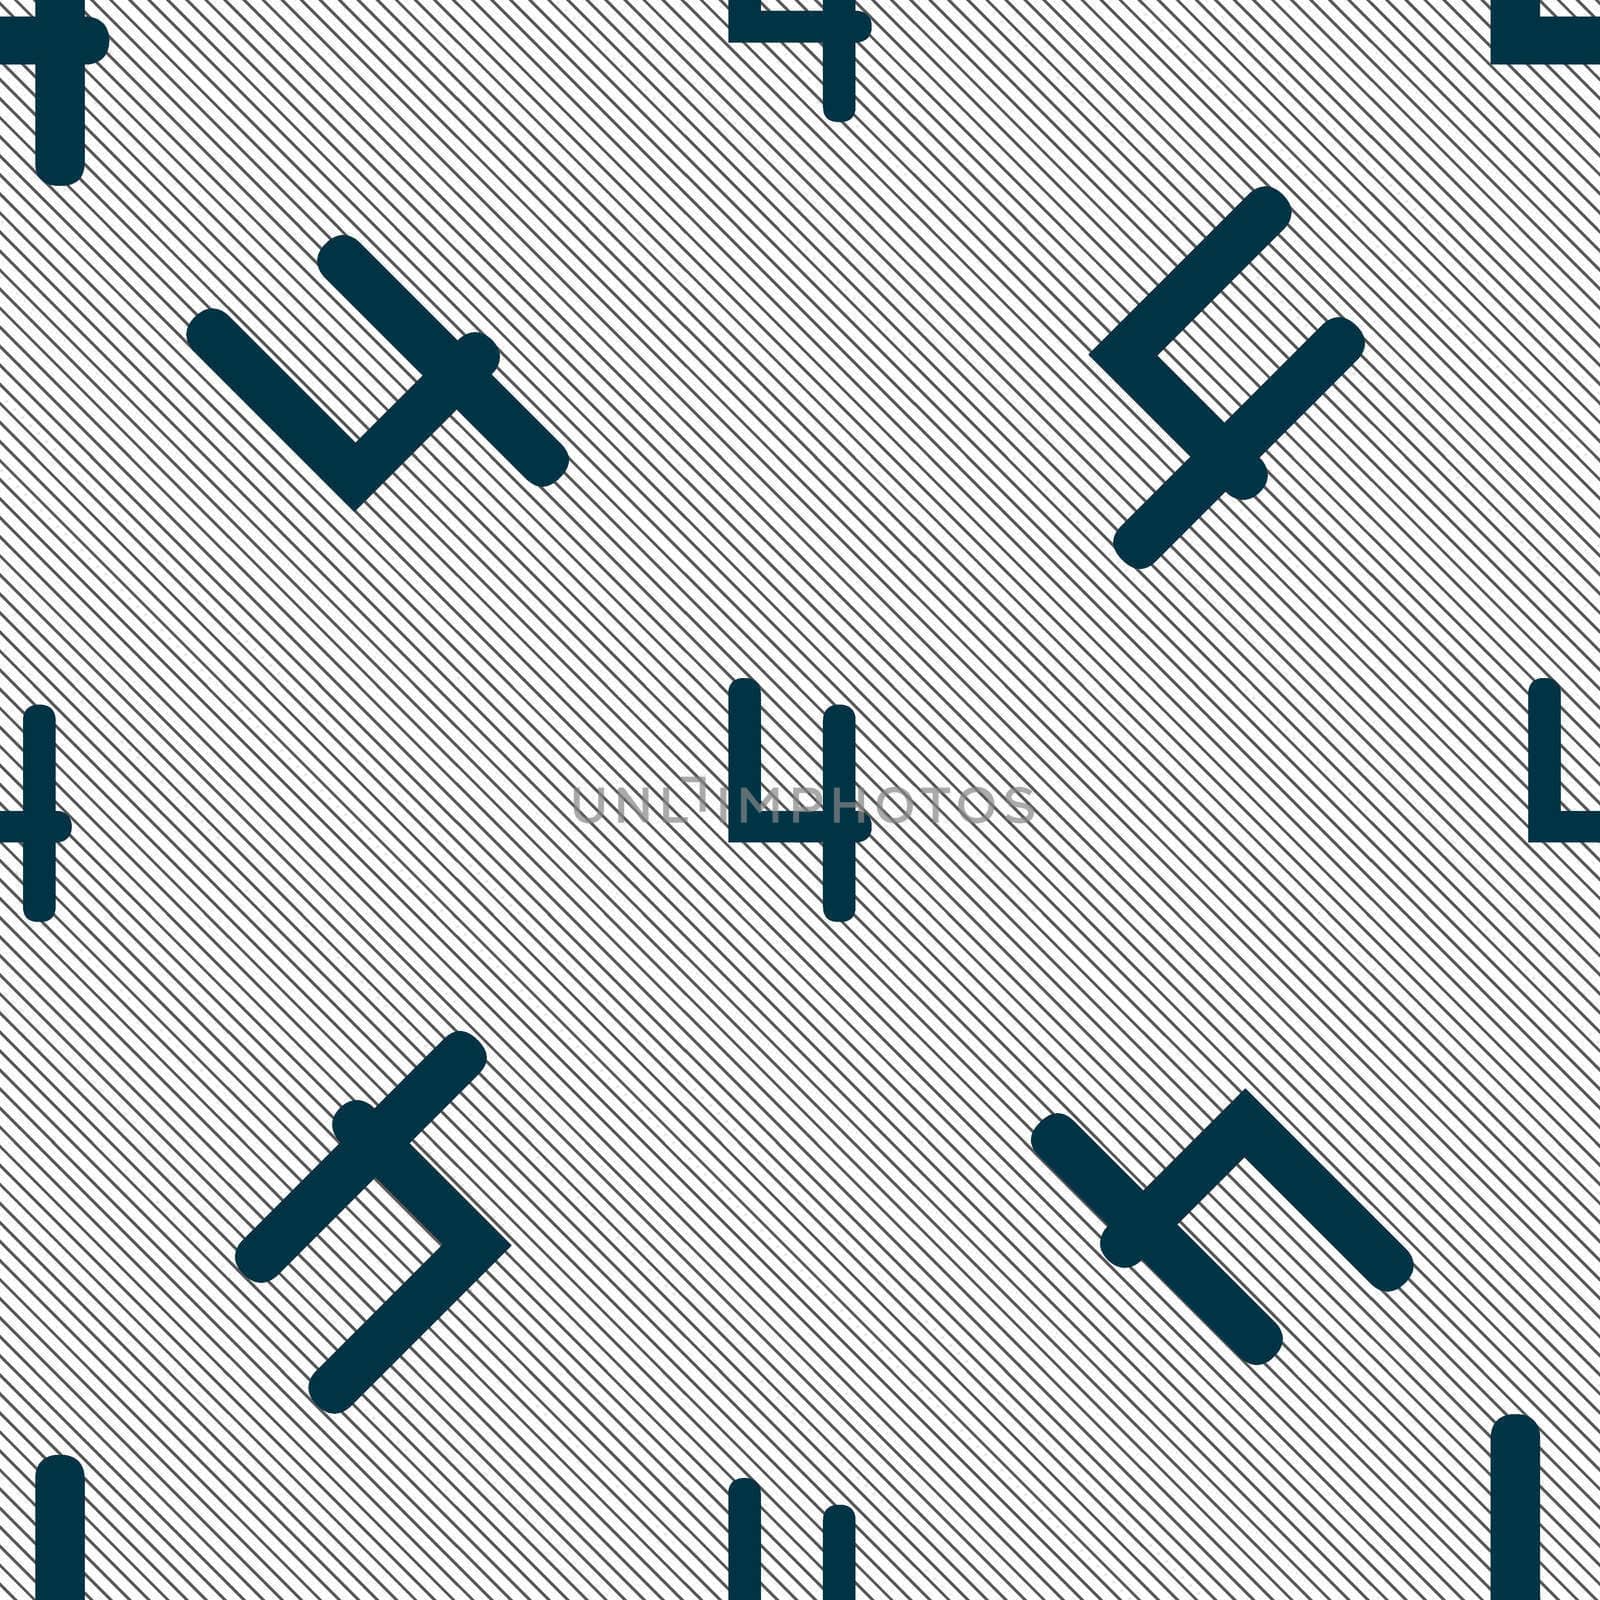 number four icon sign. Seamless pattern with geometric texture. illustration